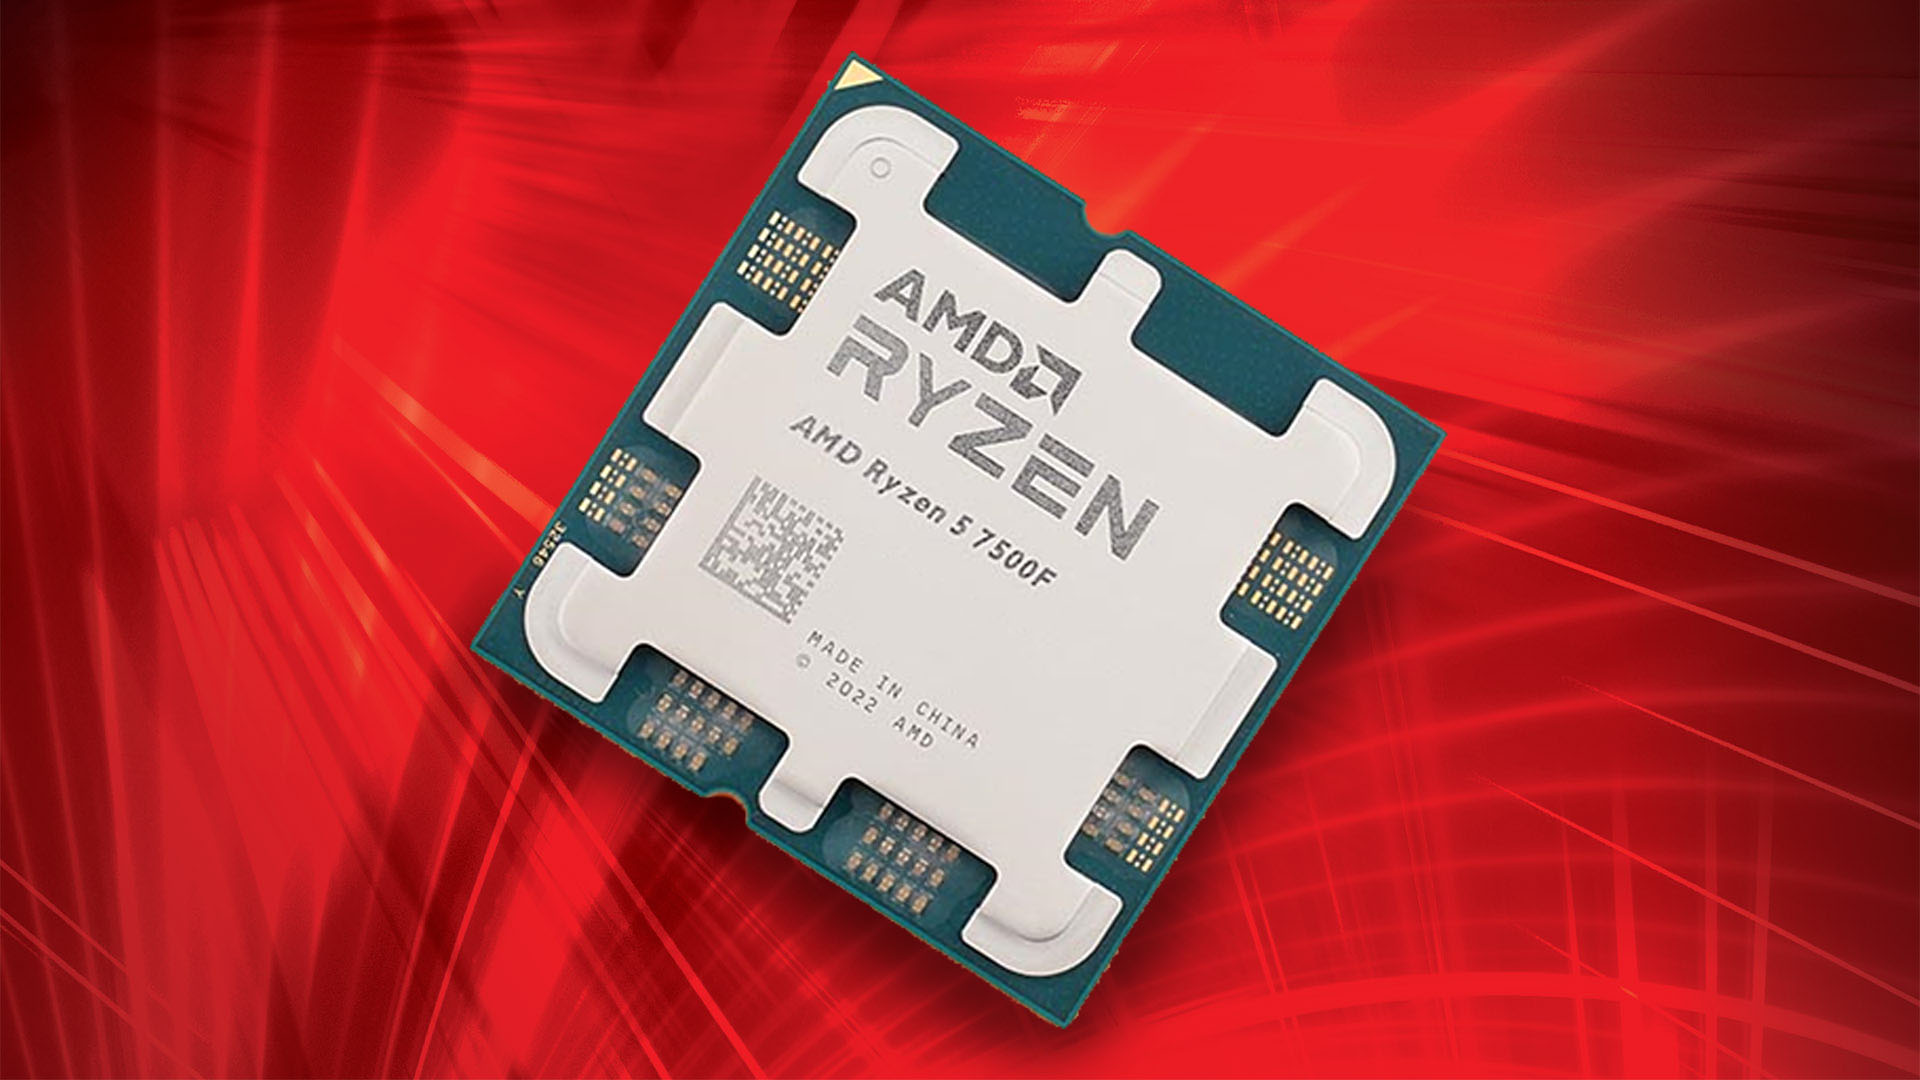 AMD Ryzen 5 7500F is now available in Germany starting from €202